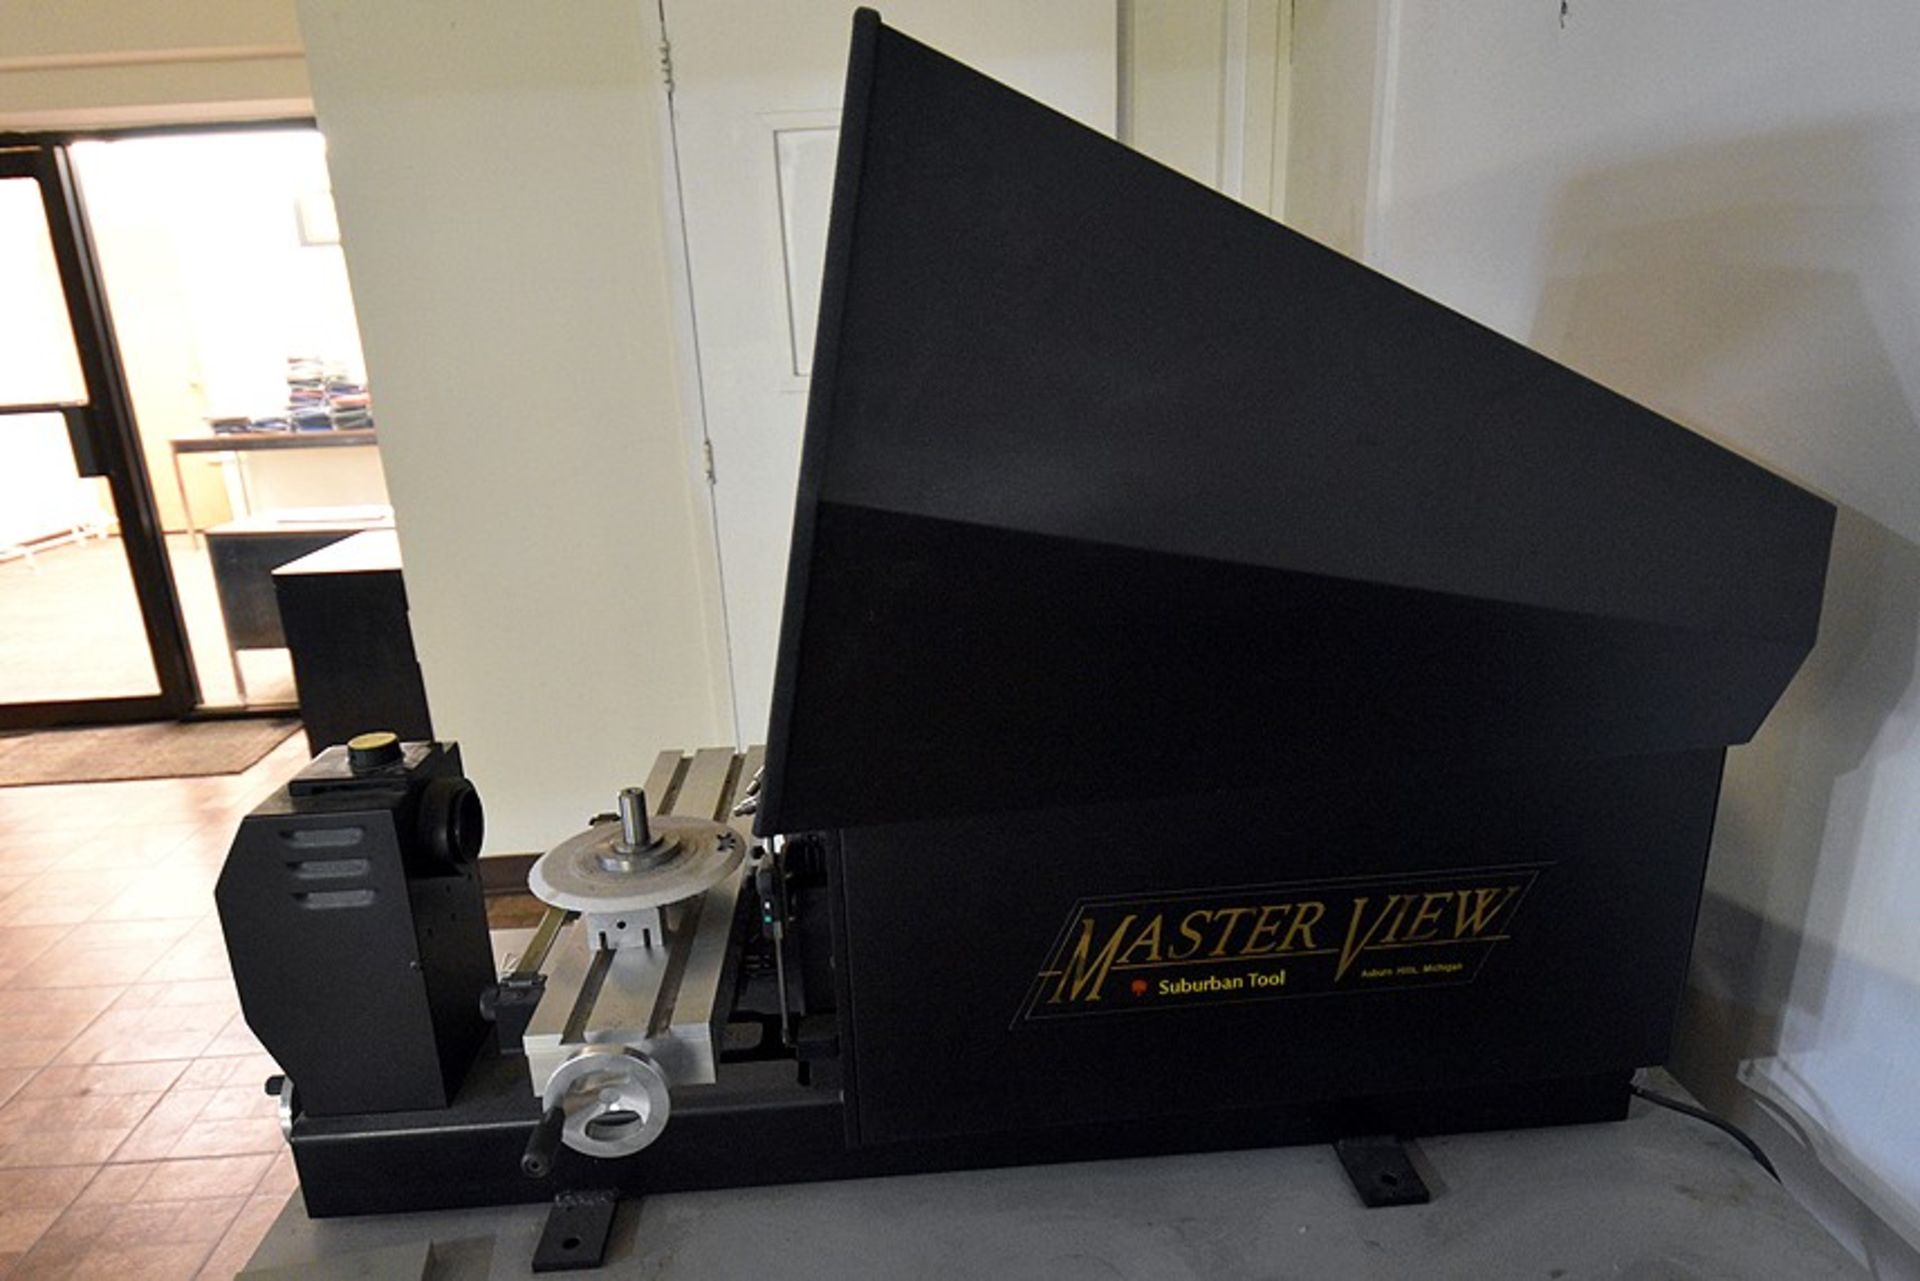 Suburban Tool Master View model MV-14 optical comparator, s/n 1223-9611M - Image 2 of 5